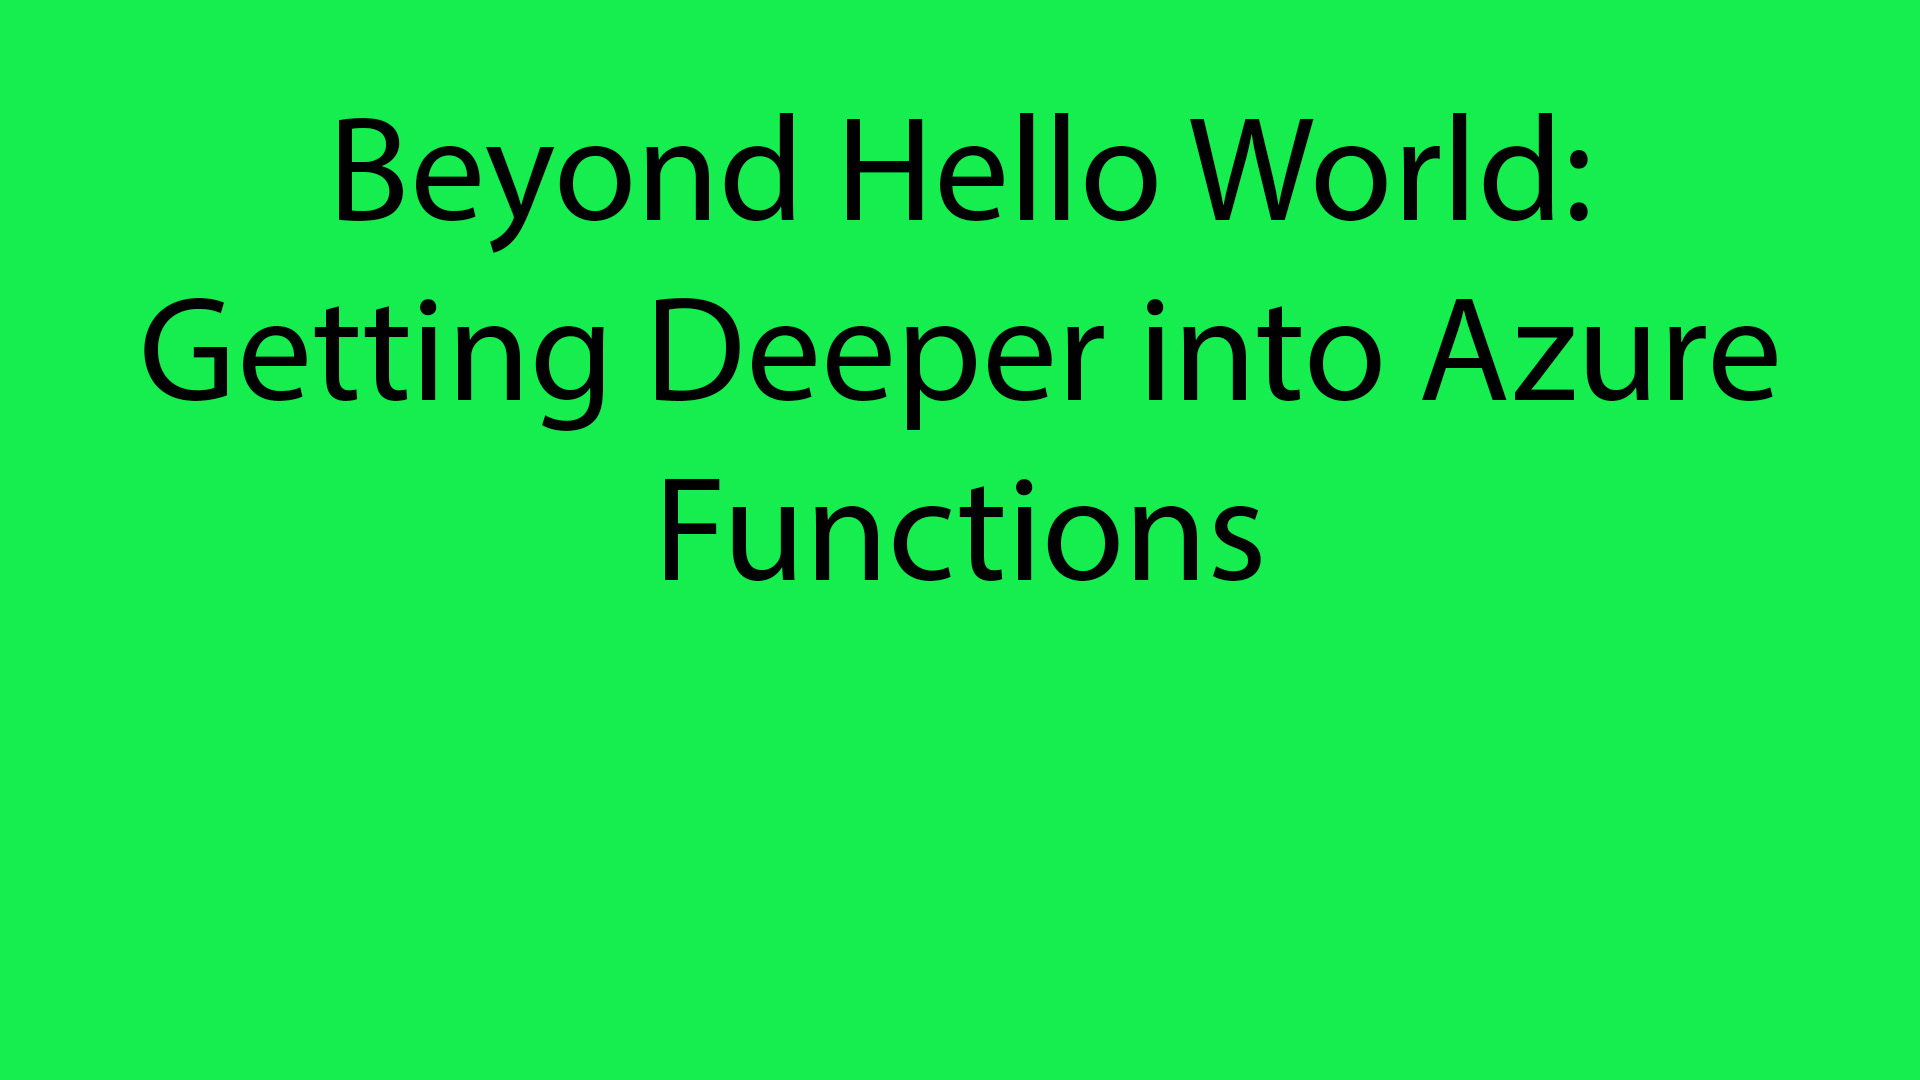 Getting Deeper into Azure Functions